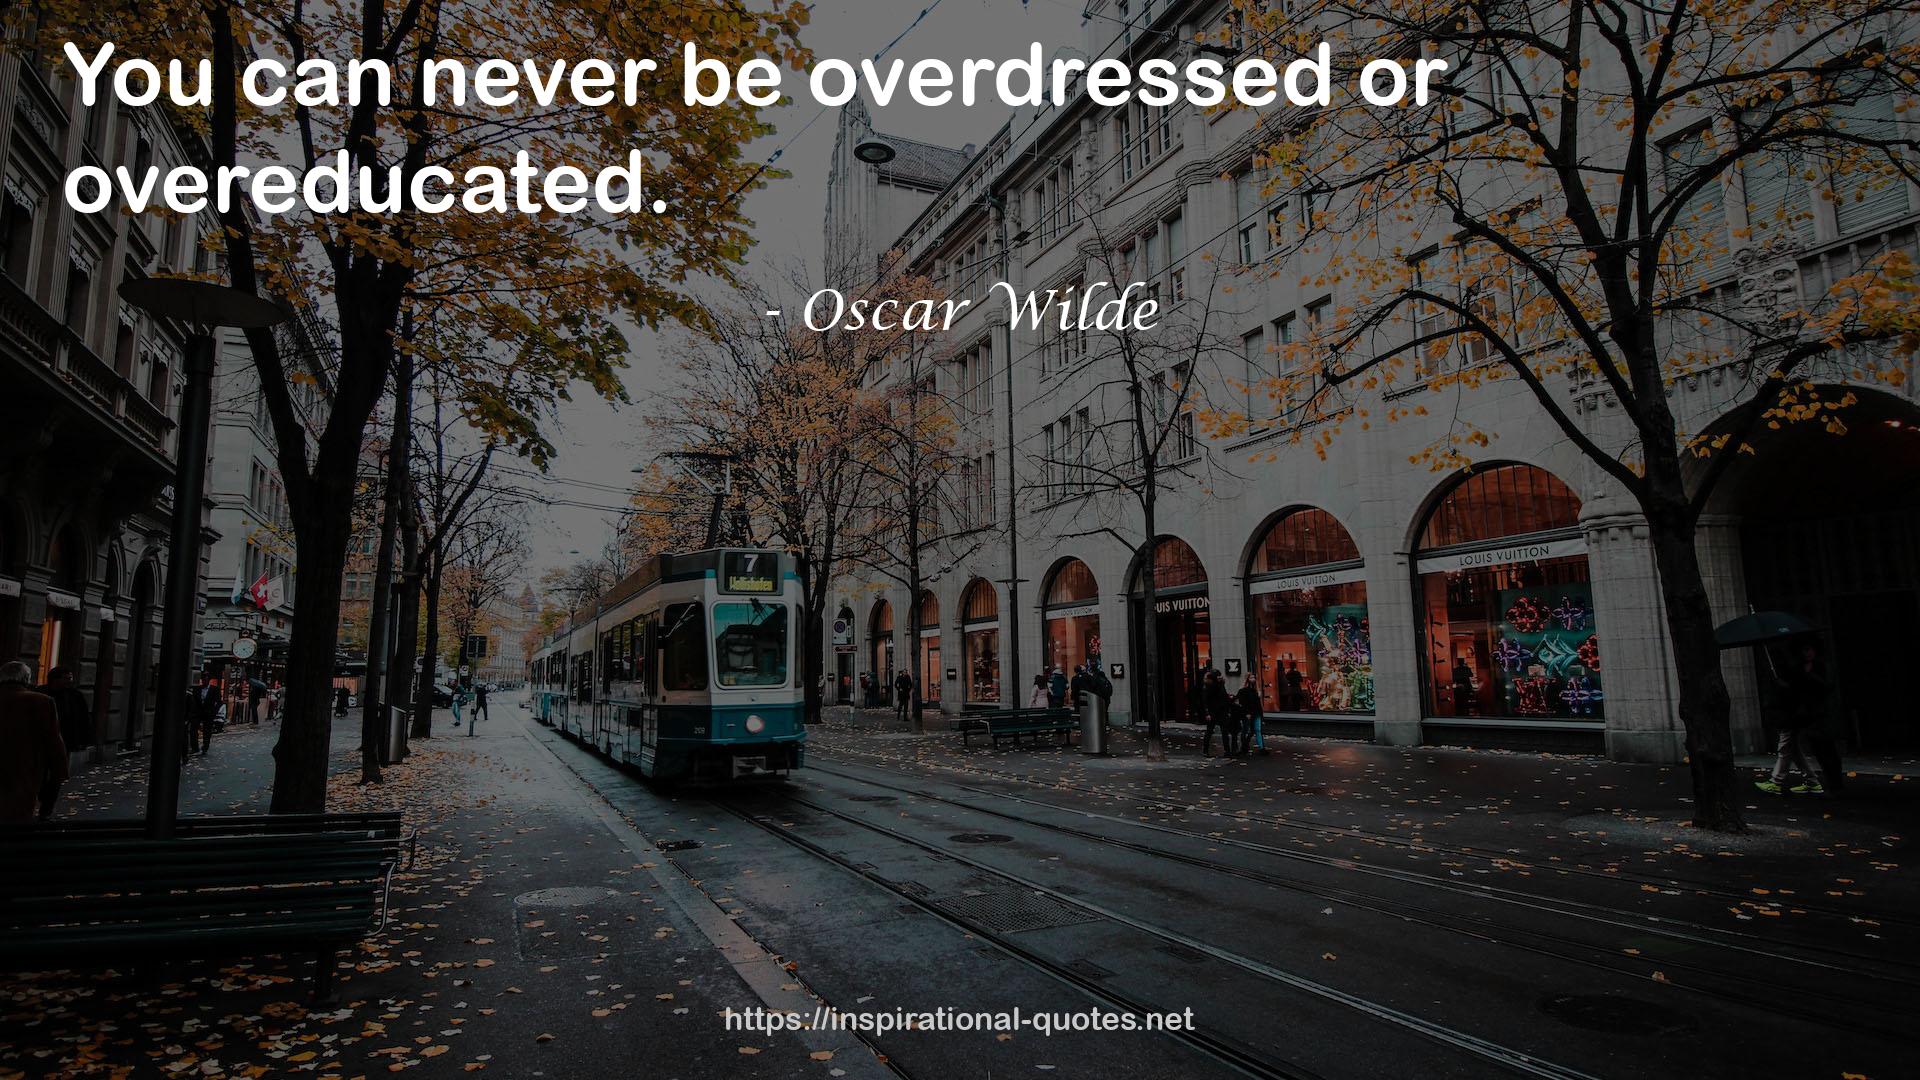 overdressed  QUOTES